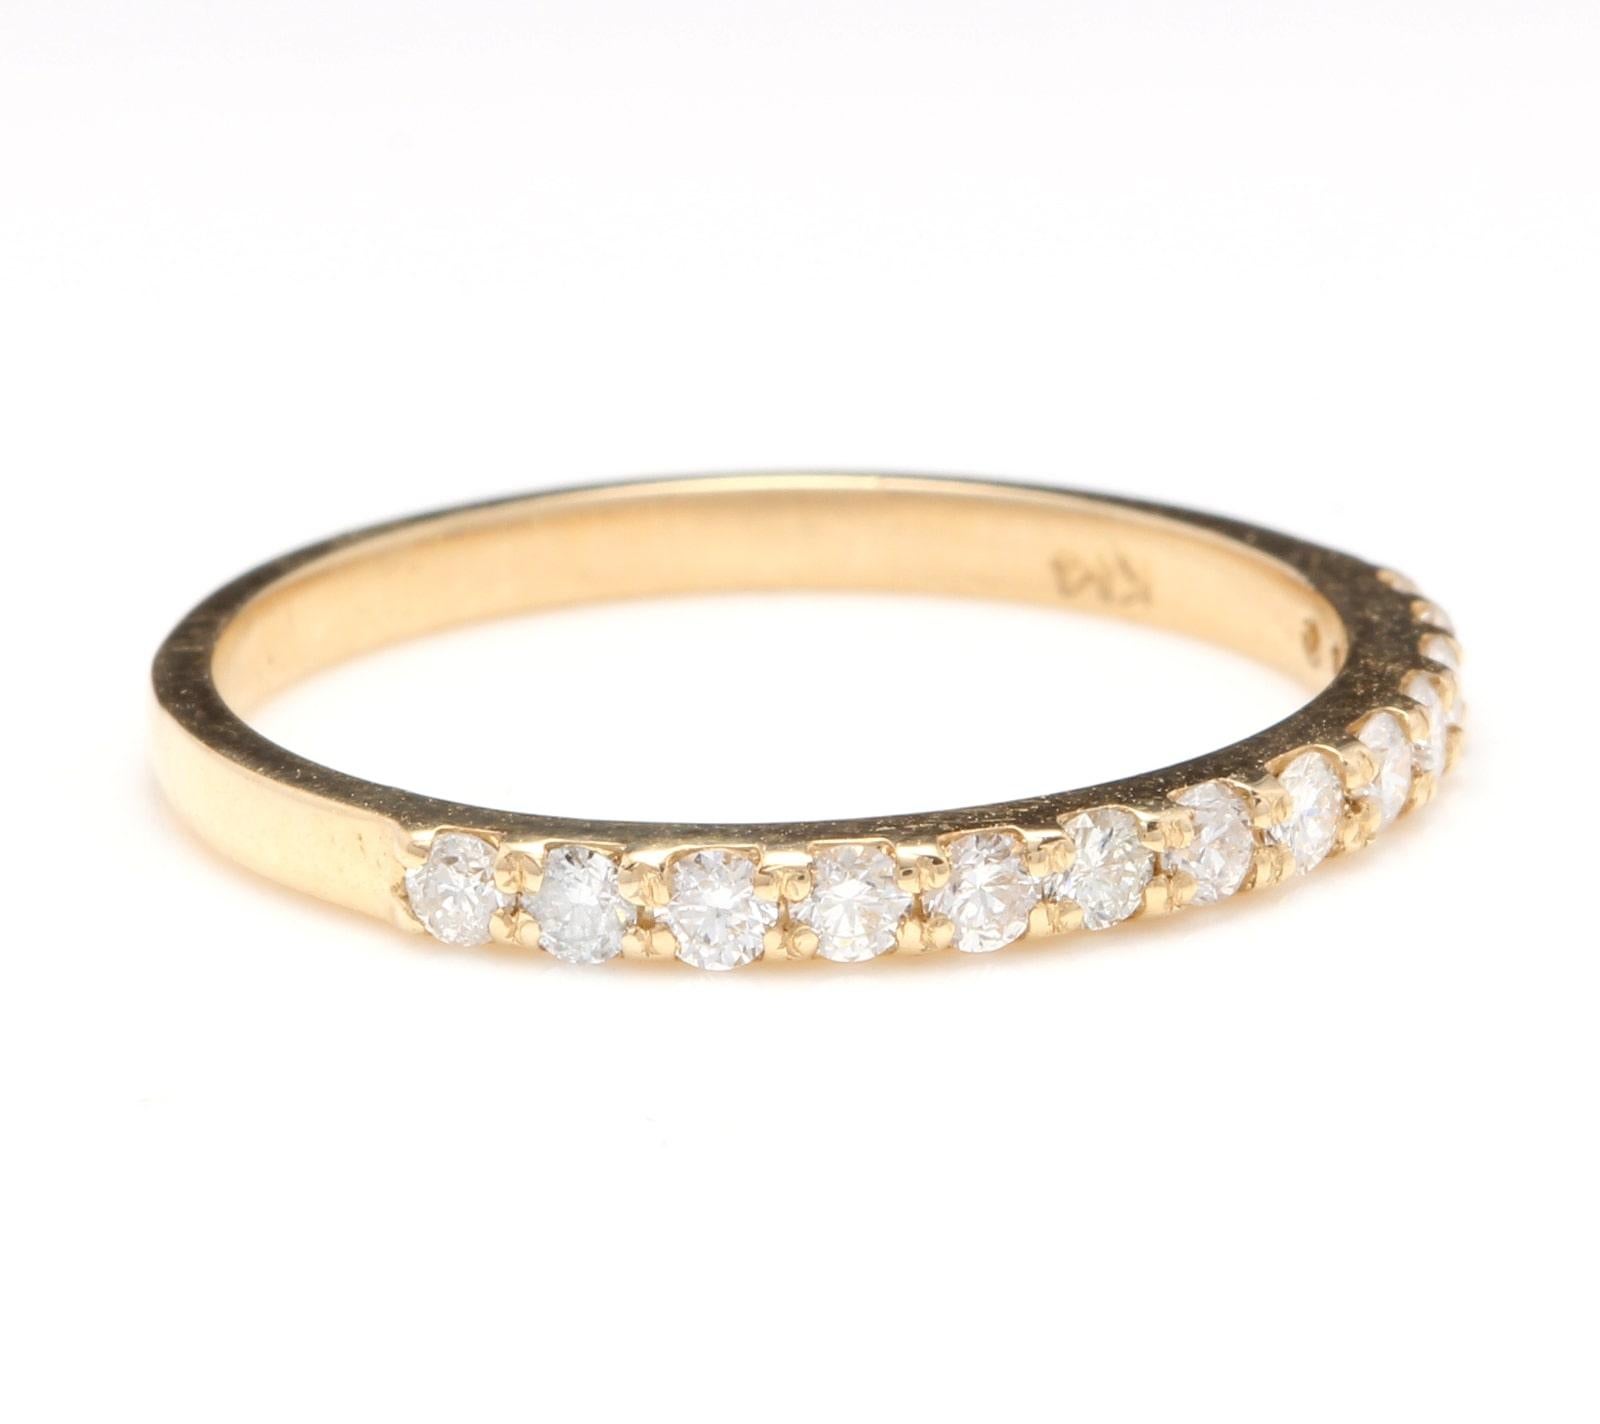 Splendid .35 Carats Natural Diamond 14K Solid Yellow Gold Ring

Suggested Replacement Value: Approx. $2,200.00

Stamped: 14K

Total Natural Round Cut Diamonds Weight: Approx. 0.35 Carats (color G-H / Clarity SI1-SI2)

The width of the ring is: